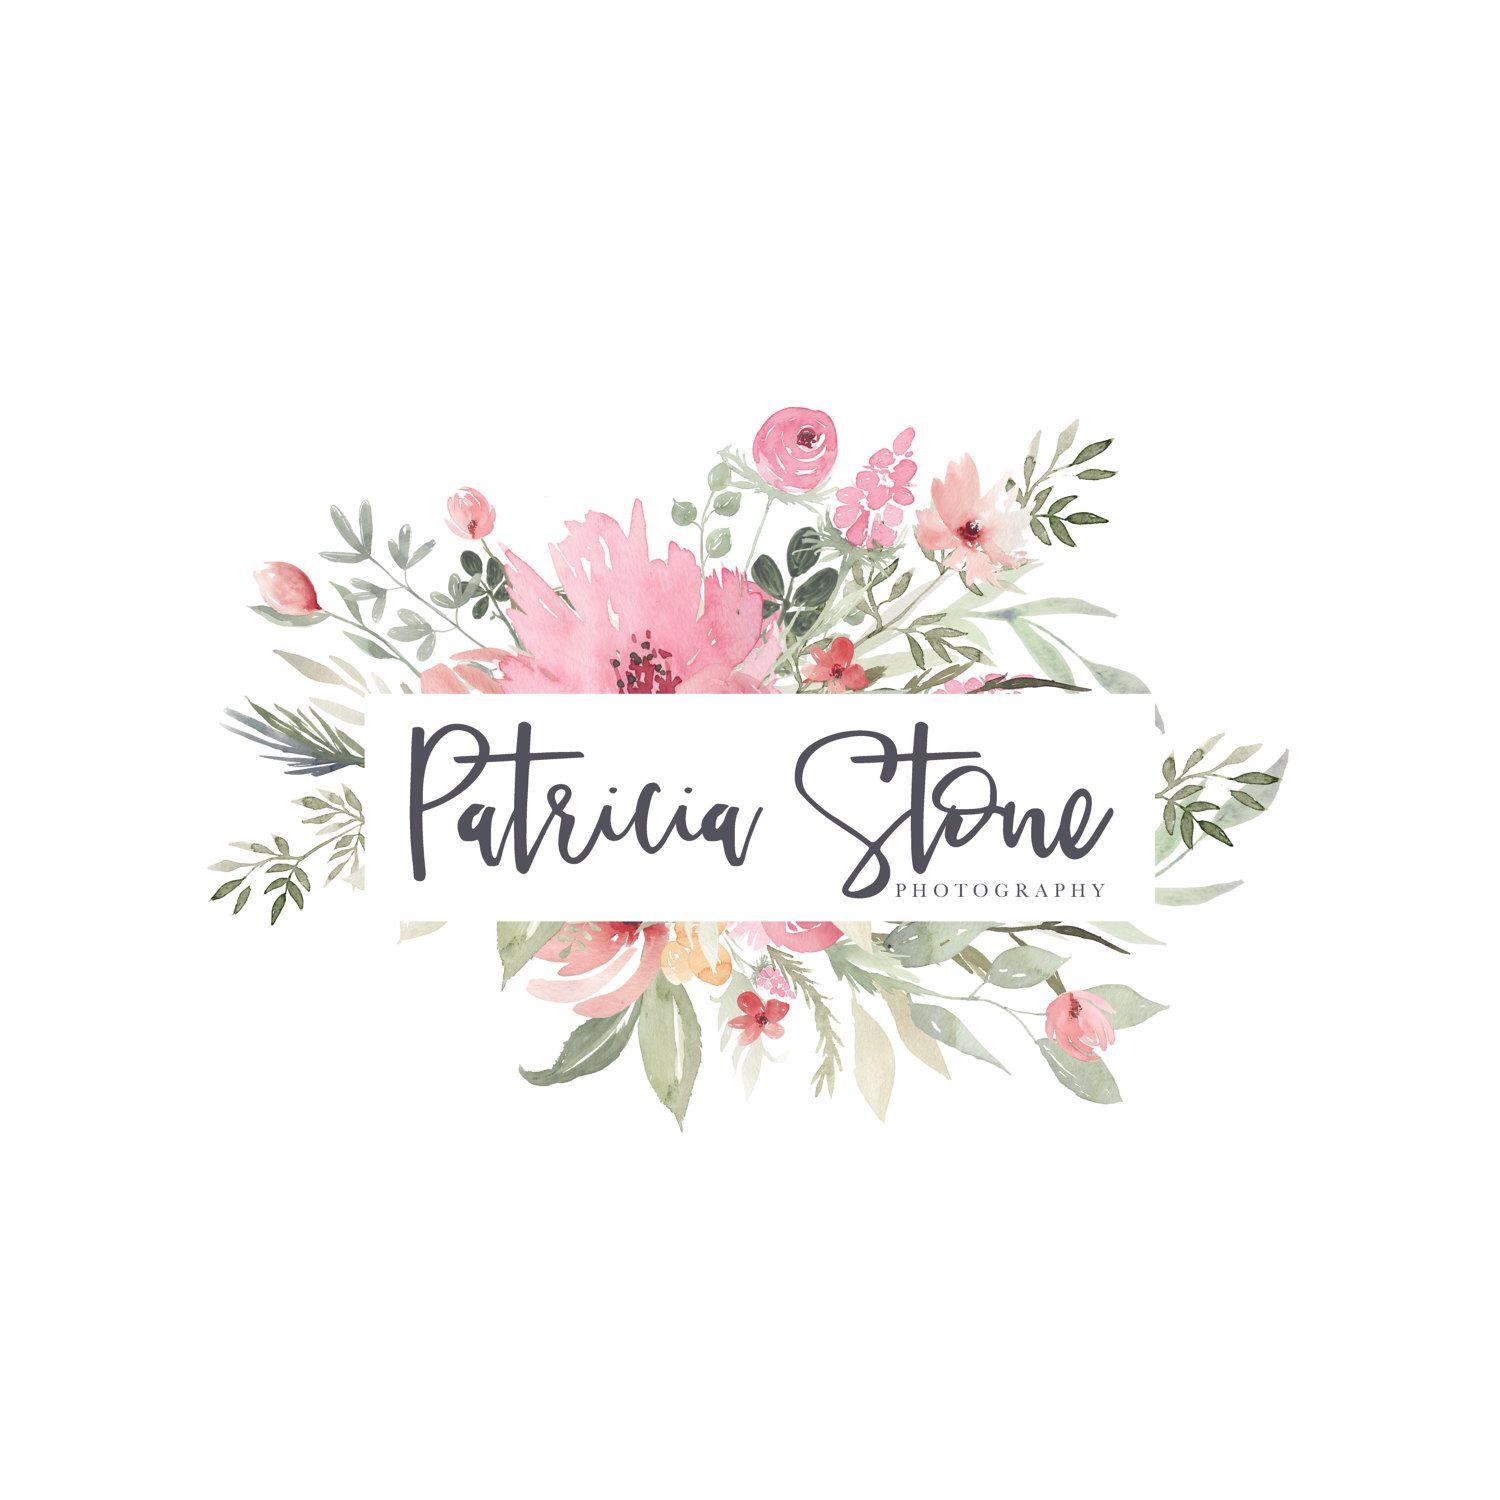 Watercolor Flower Logo - Watercolor Flower Logo - Premade Photography Logo and Watermark ...